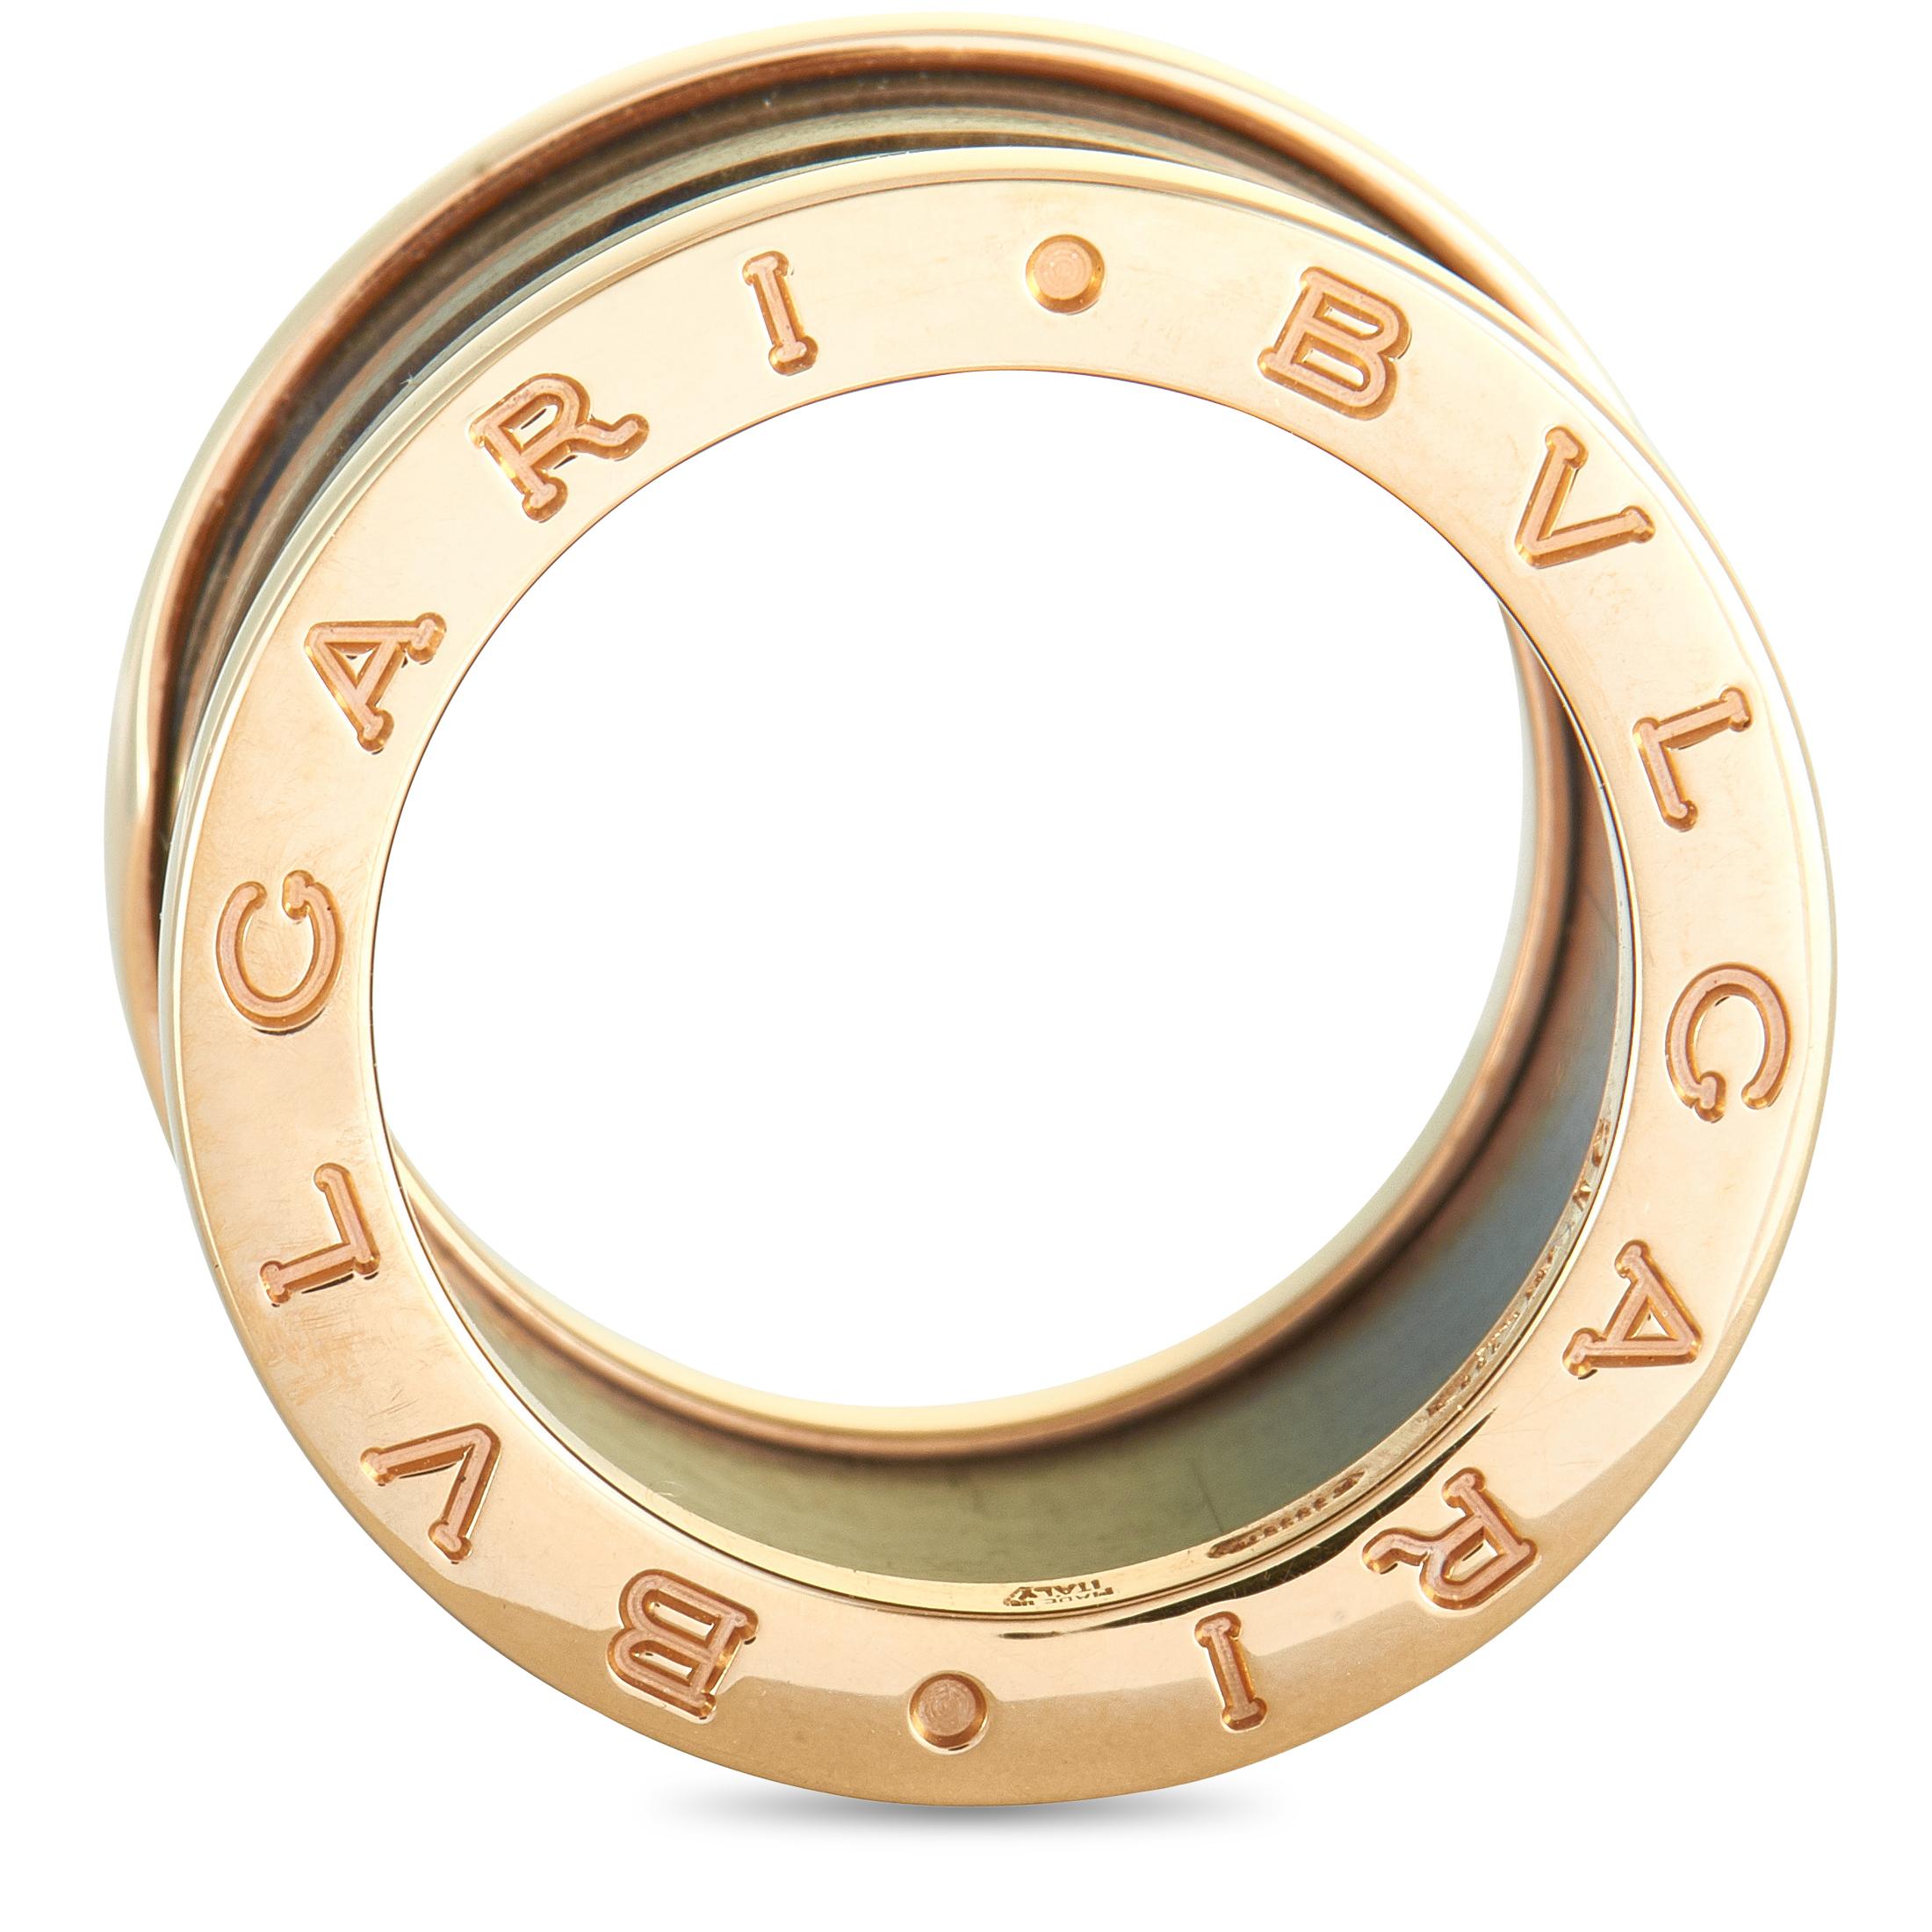 The Bvlgari “B.zero1” ring is made out of 18K rose gold and brown ceramic and weighs 7.2 grams, boasting band thickness of 12 mm.
Ring Size: 5.75

This jewelry piece is offered in brand new condition and includes the manufacturer’s box and papers.